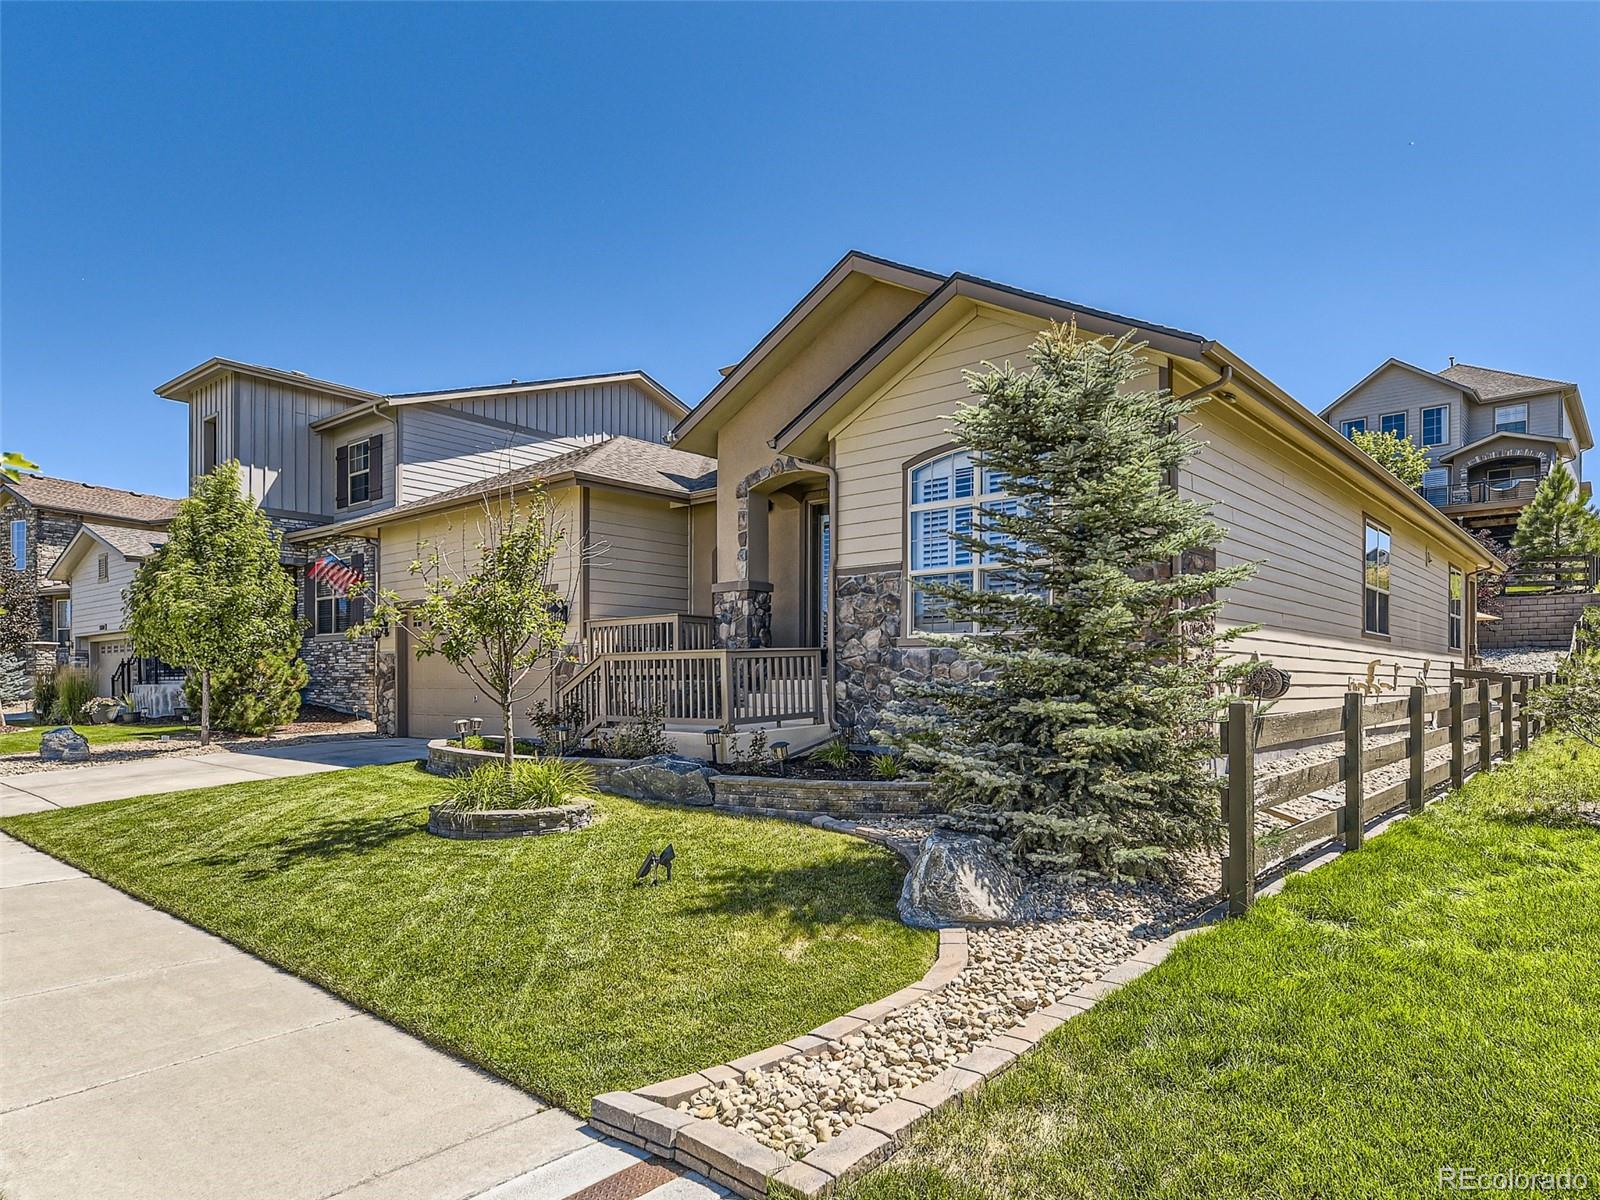 CMA Image for 12173 s tallkid court,Parker, Colorado